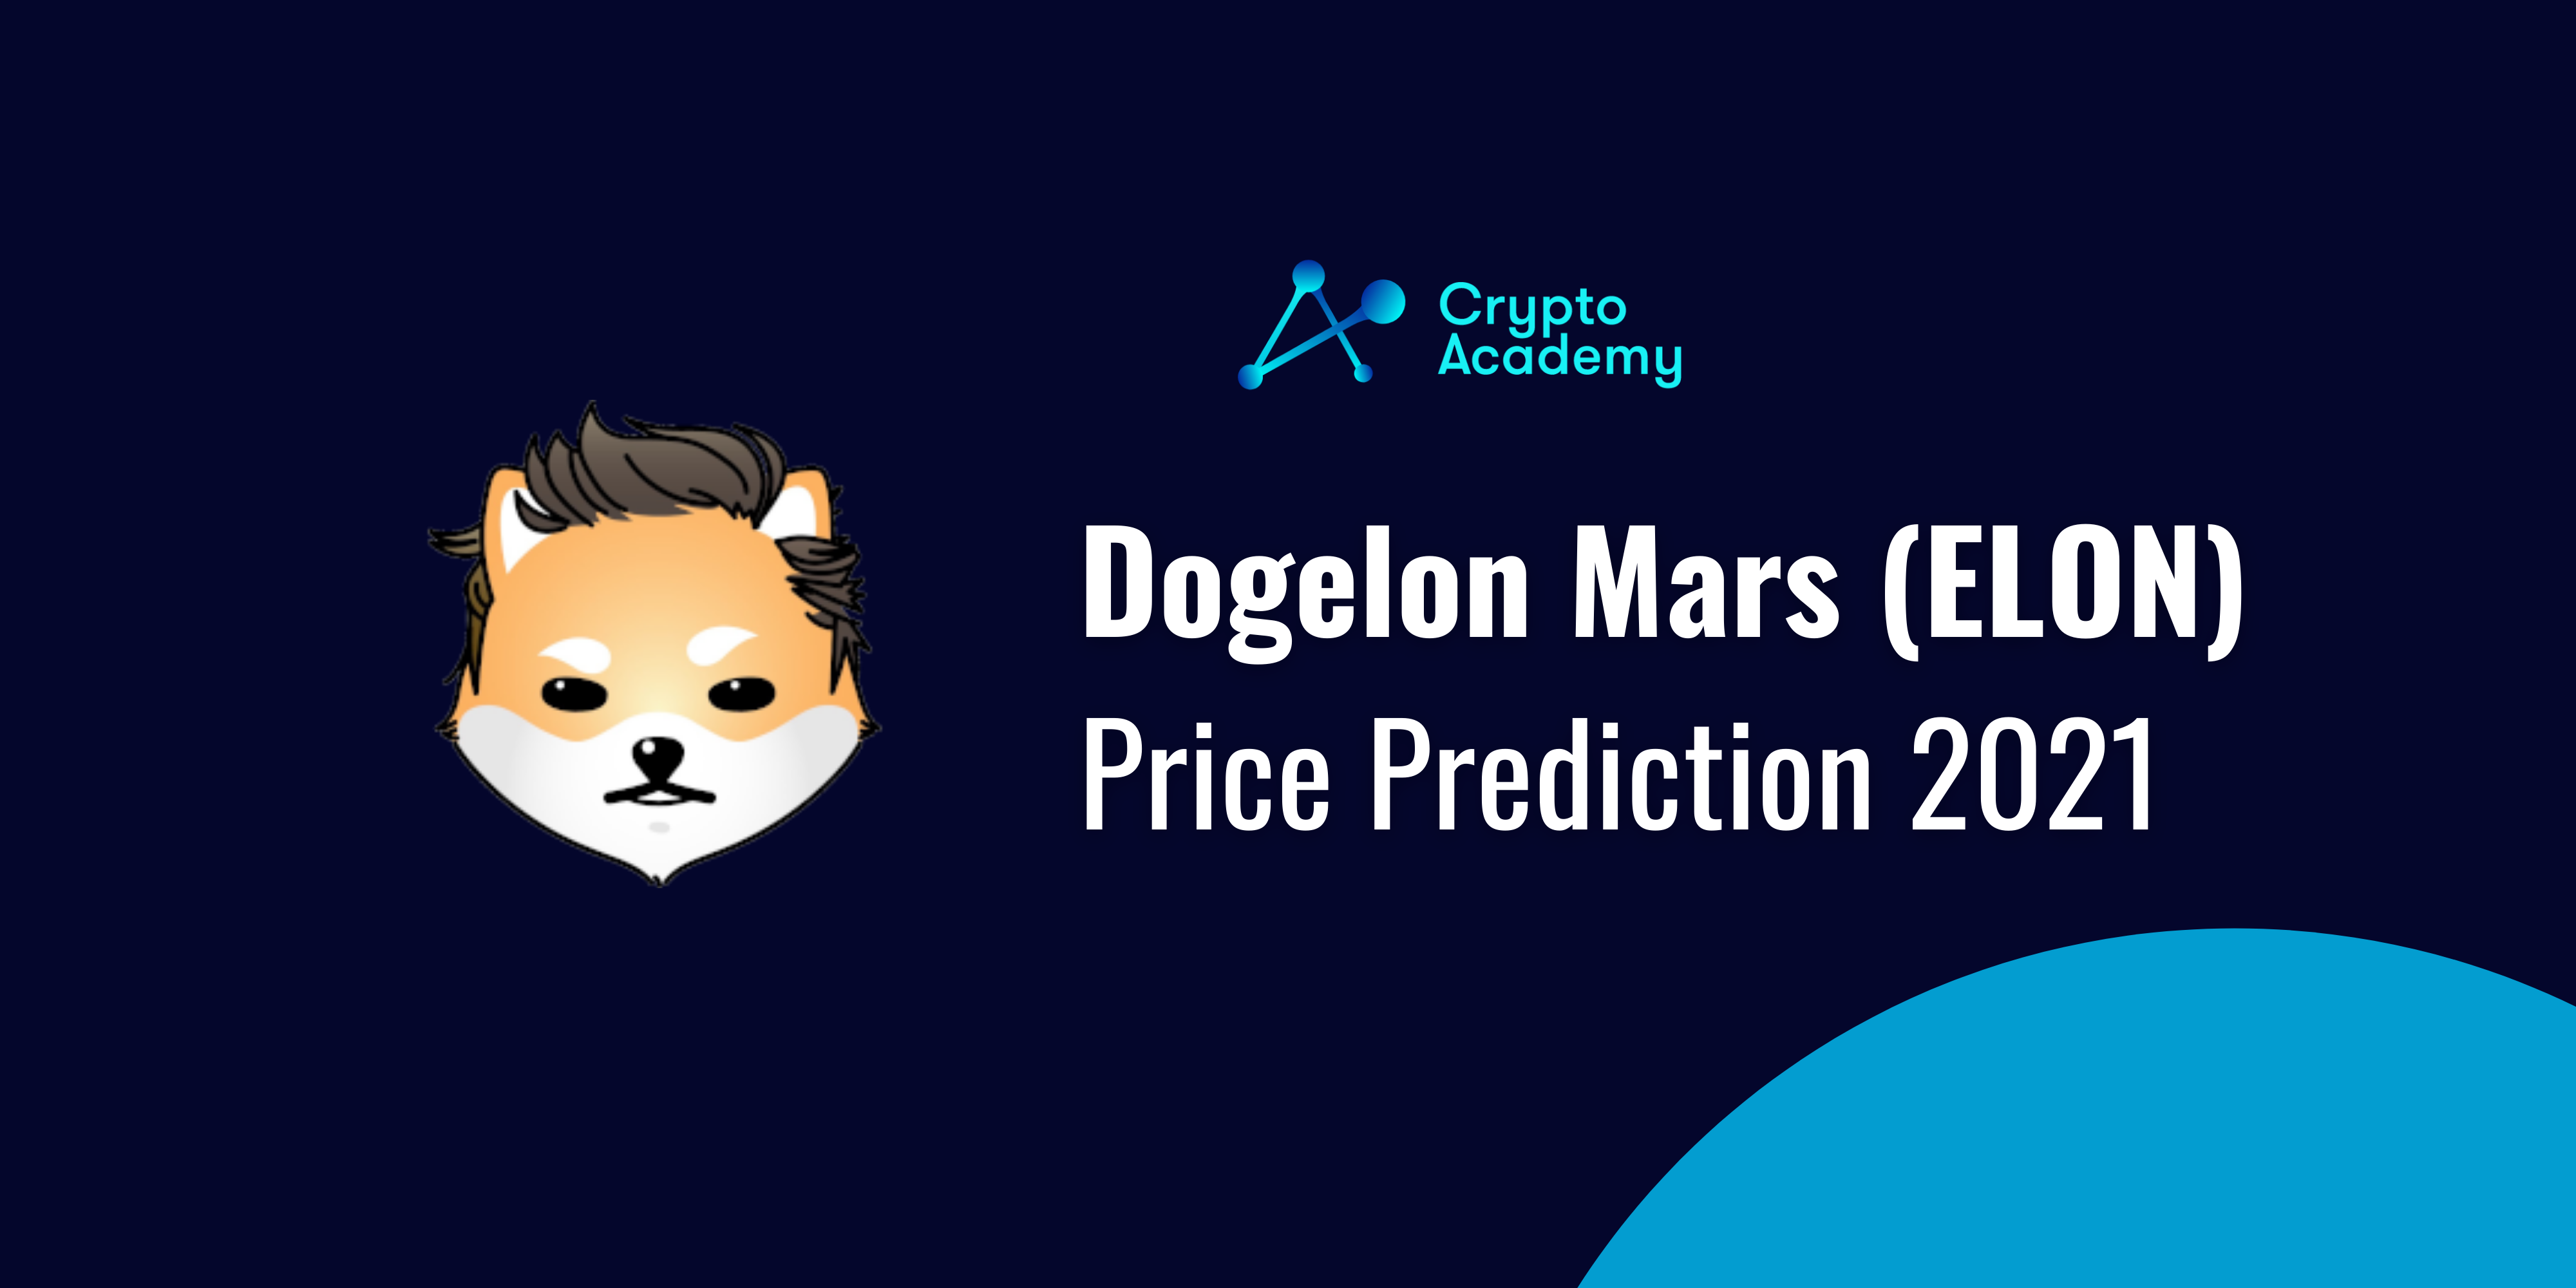 Dogelon Mars (ELON) Price Prediction 2021 - How High Can ELON Price Go by the End of 2021?